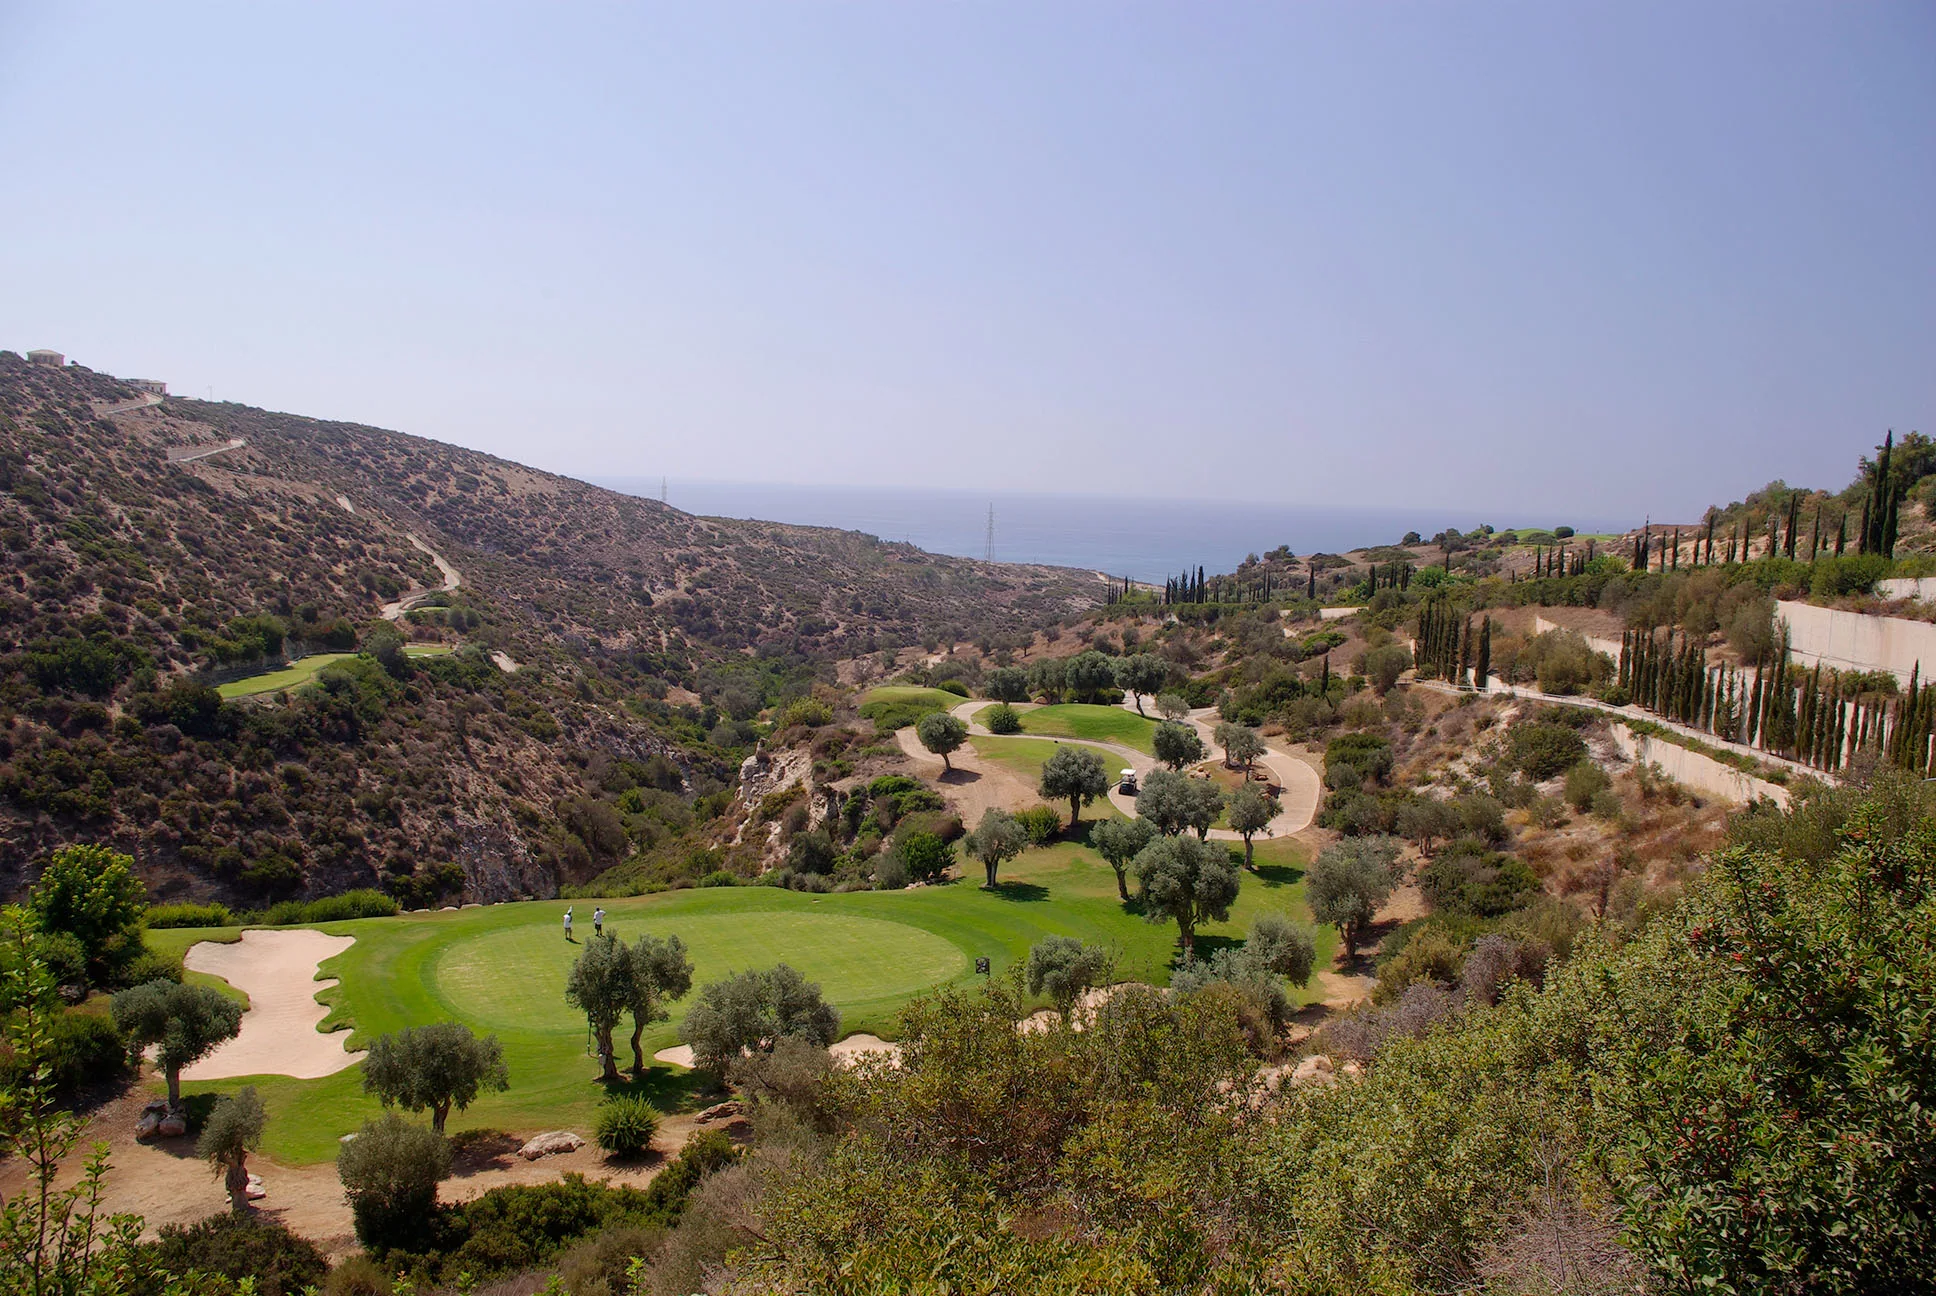 Aerial view looking down to the 7th green on Aphrodite Hills PGA National Golf Course, with view of the Mediterranean Sea in the background.